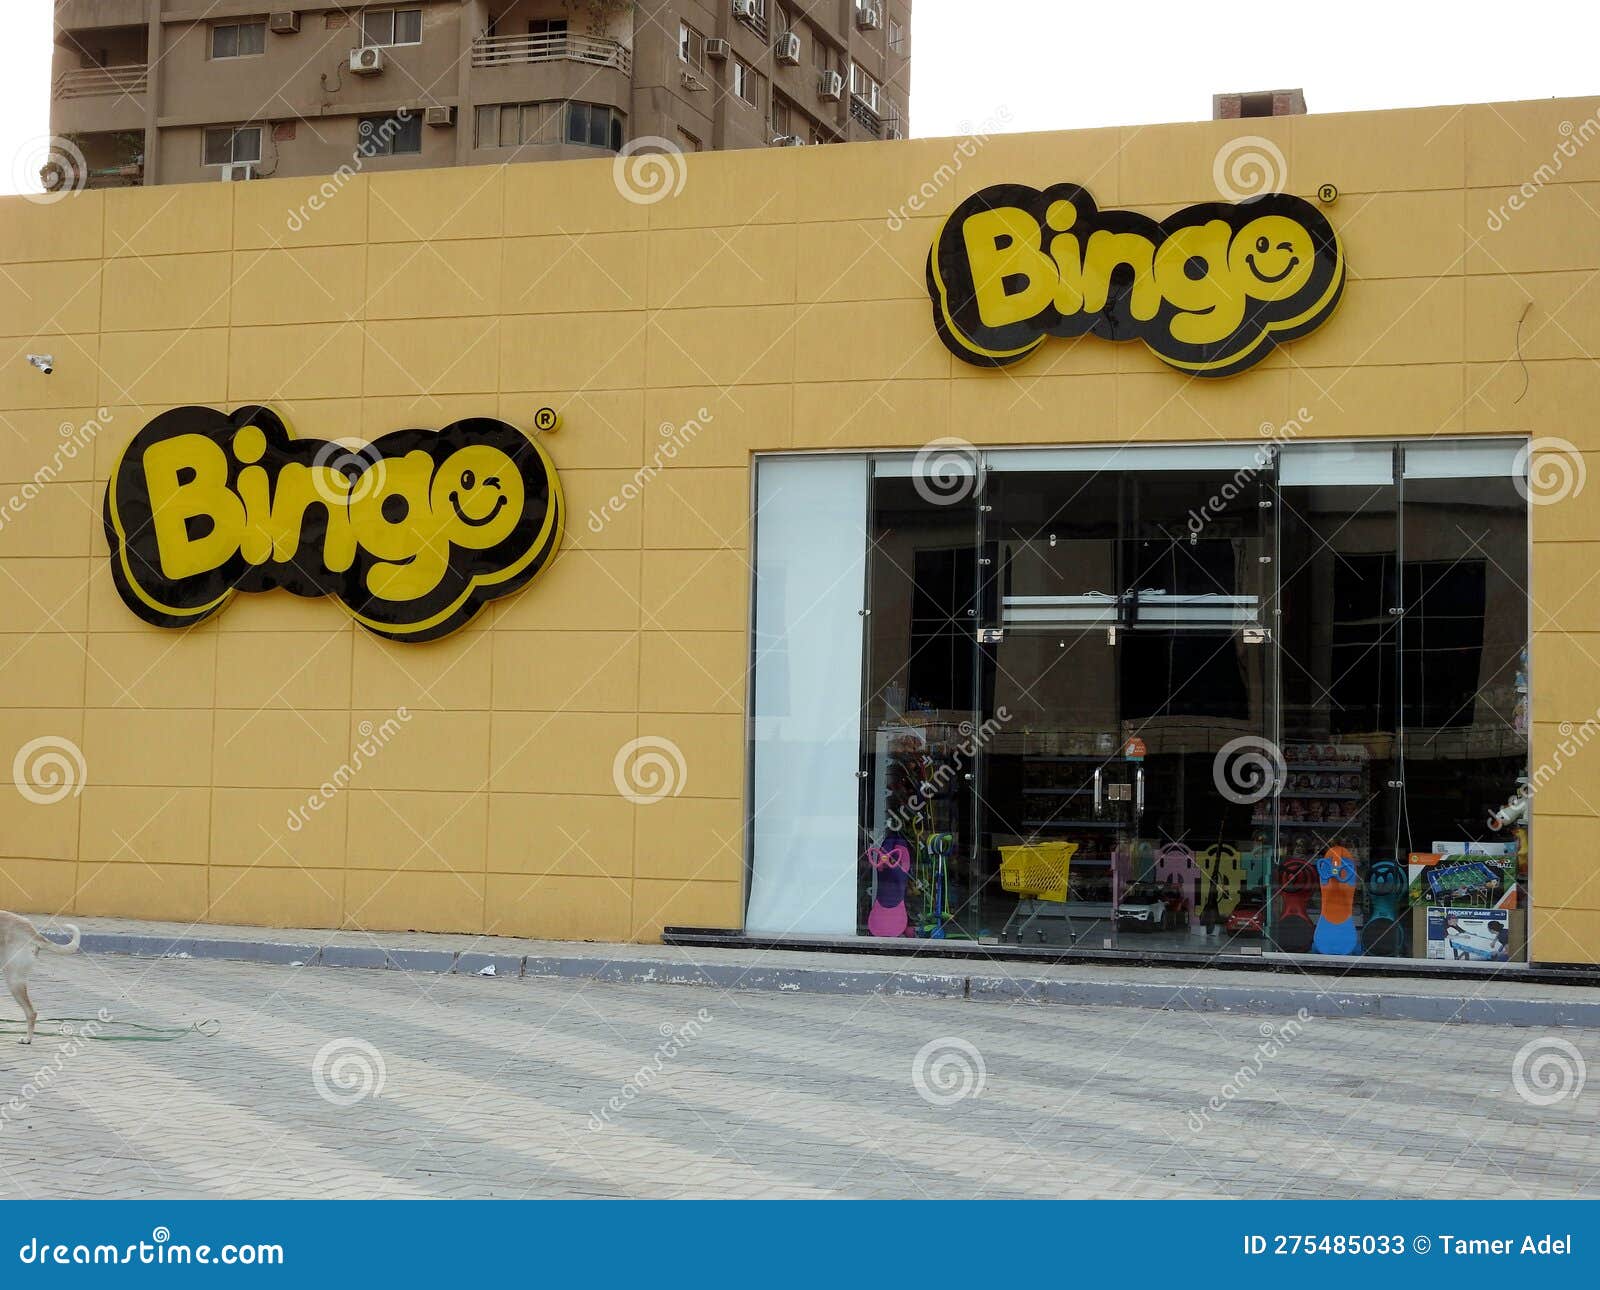 https://thumbs.dreamstime.com/z/cairo-egypt-april-bingo-children-toys-games-store-shop-global-trading-supplies-egyptian-shared-stock-company-one-275485033.jpg